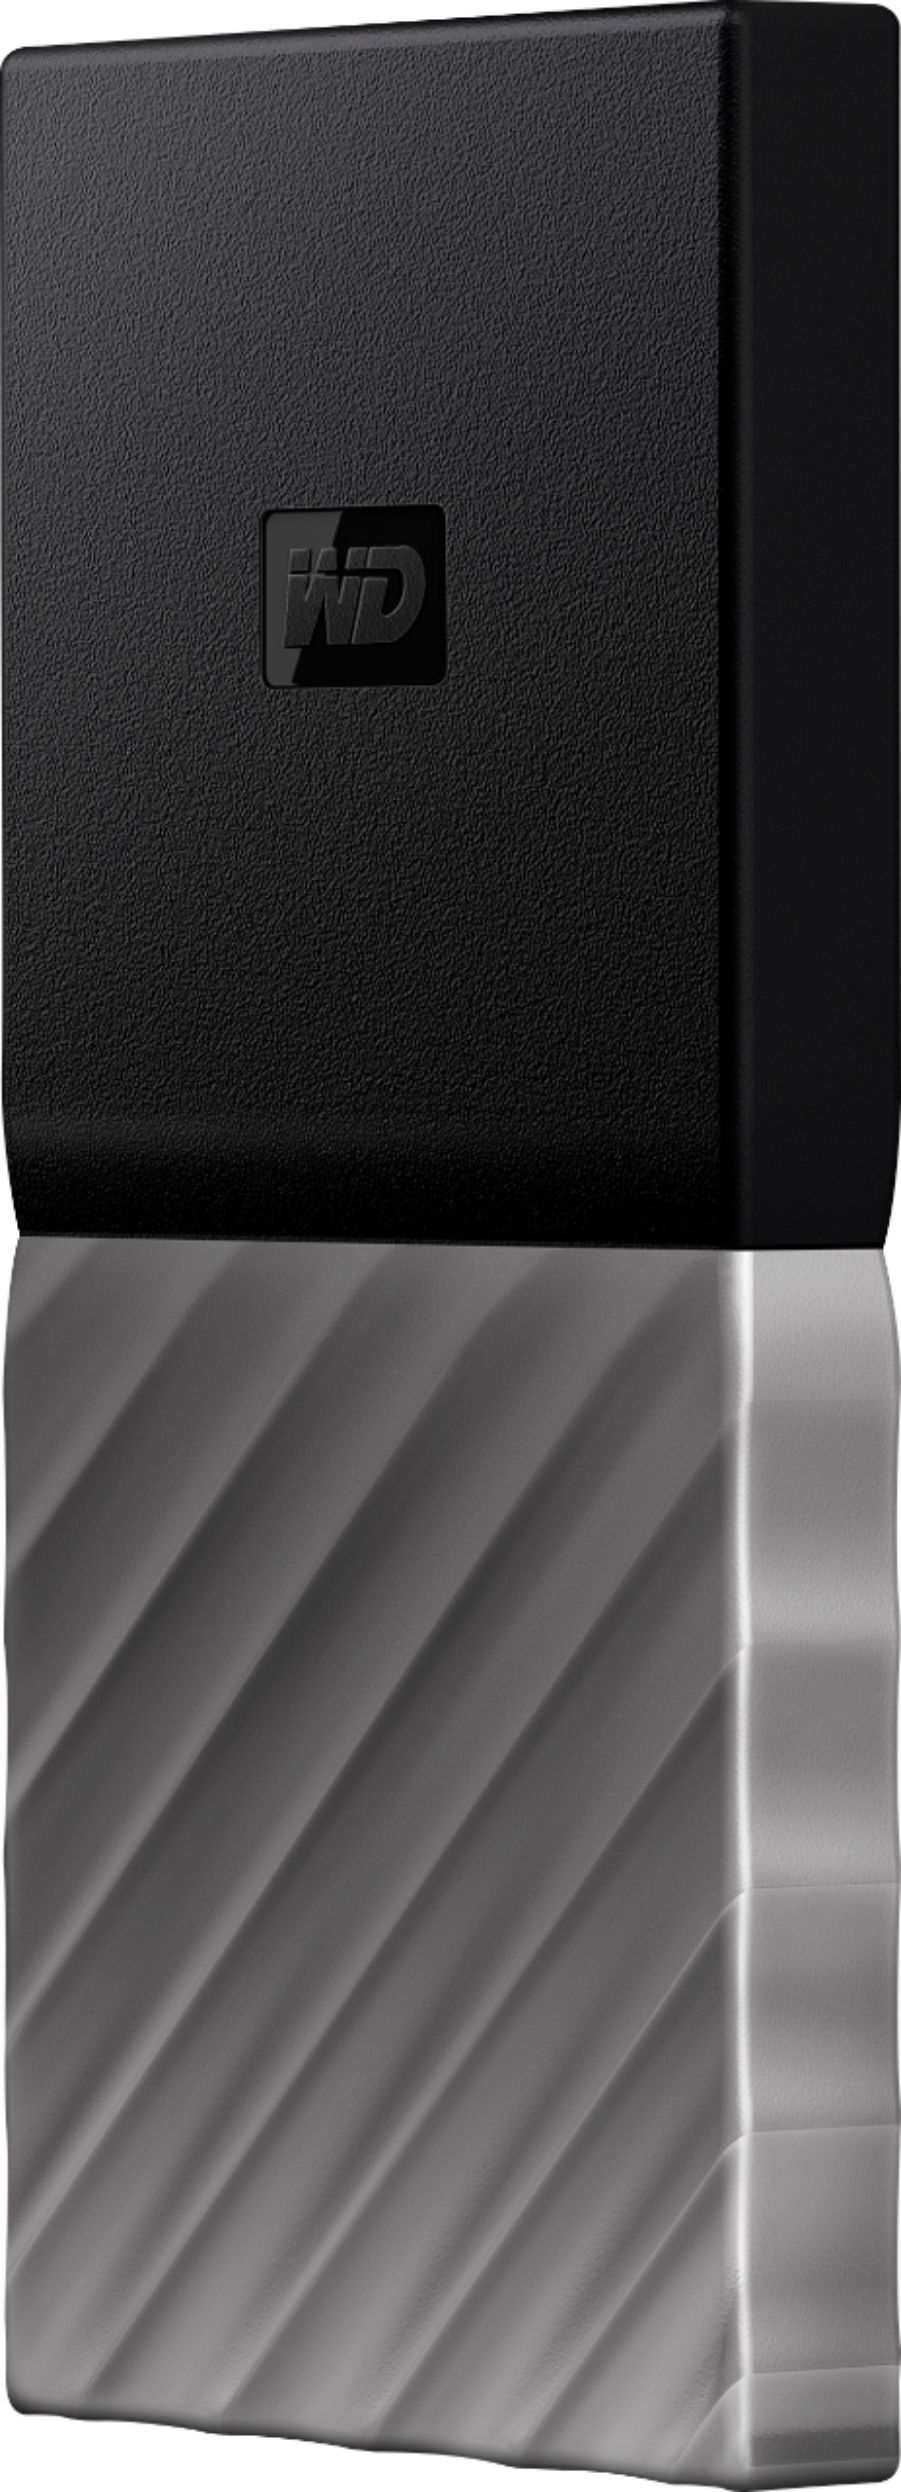 Left View: WD - My Passport SSD 512GB External USB 3.1 Gen 2 Portable Solid State Drive - Black